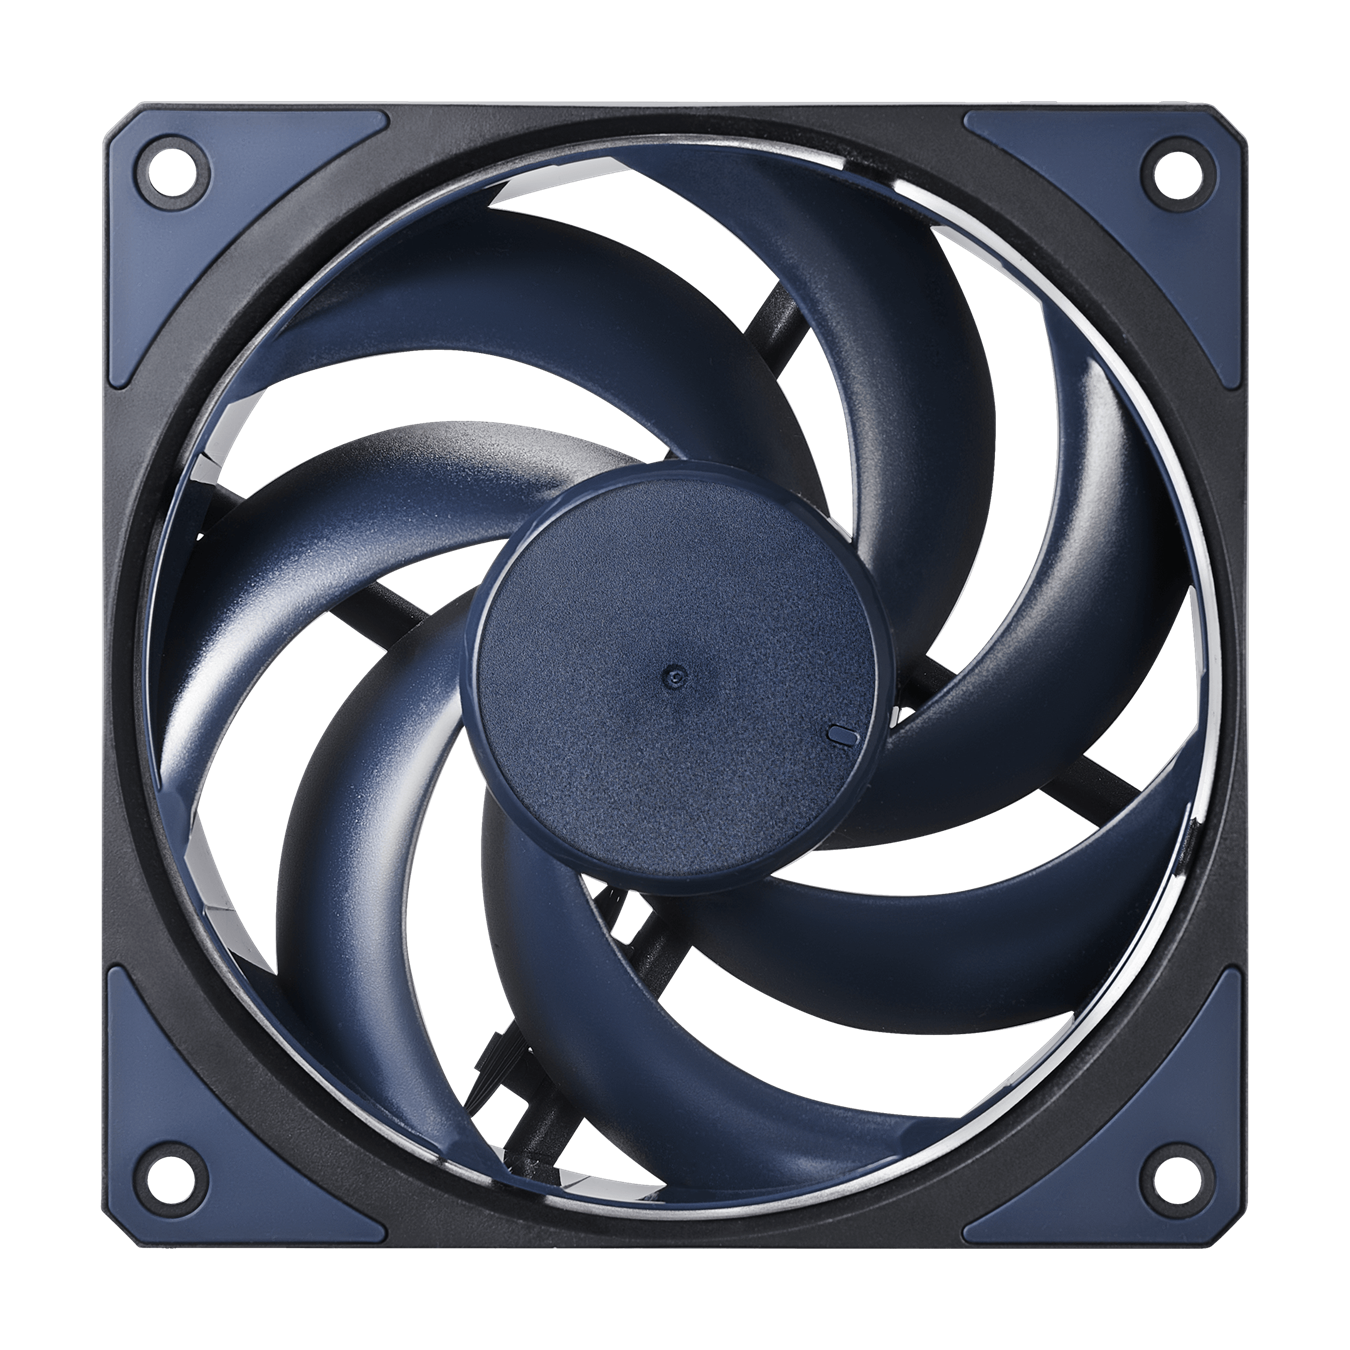 Mobius 120 -  Interconnecting fan blades designed for a reinforced and rigid structure, eliminating vibration for stable fan rotation.